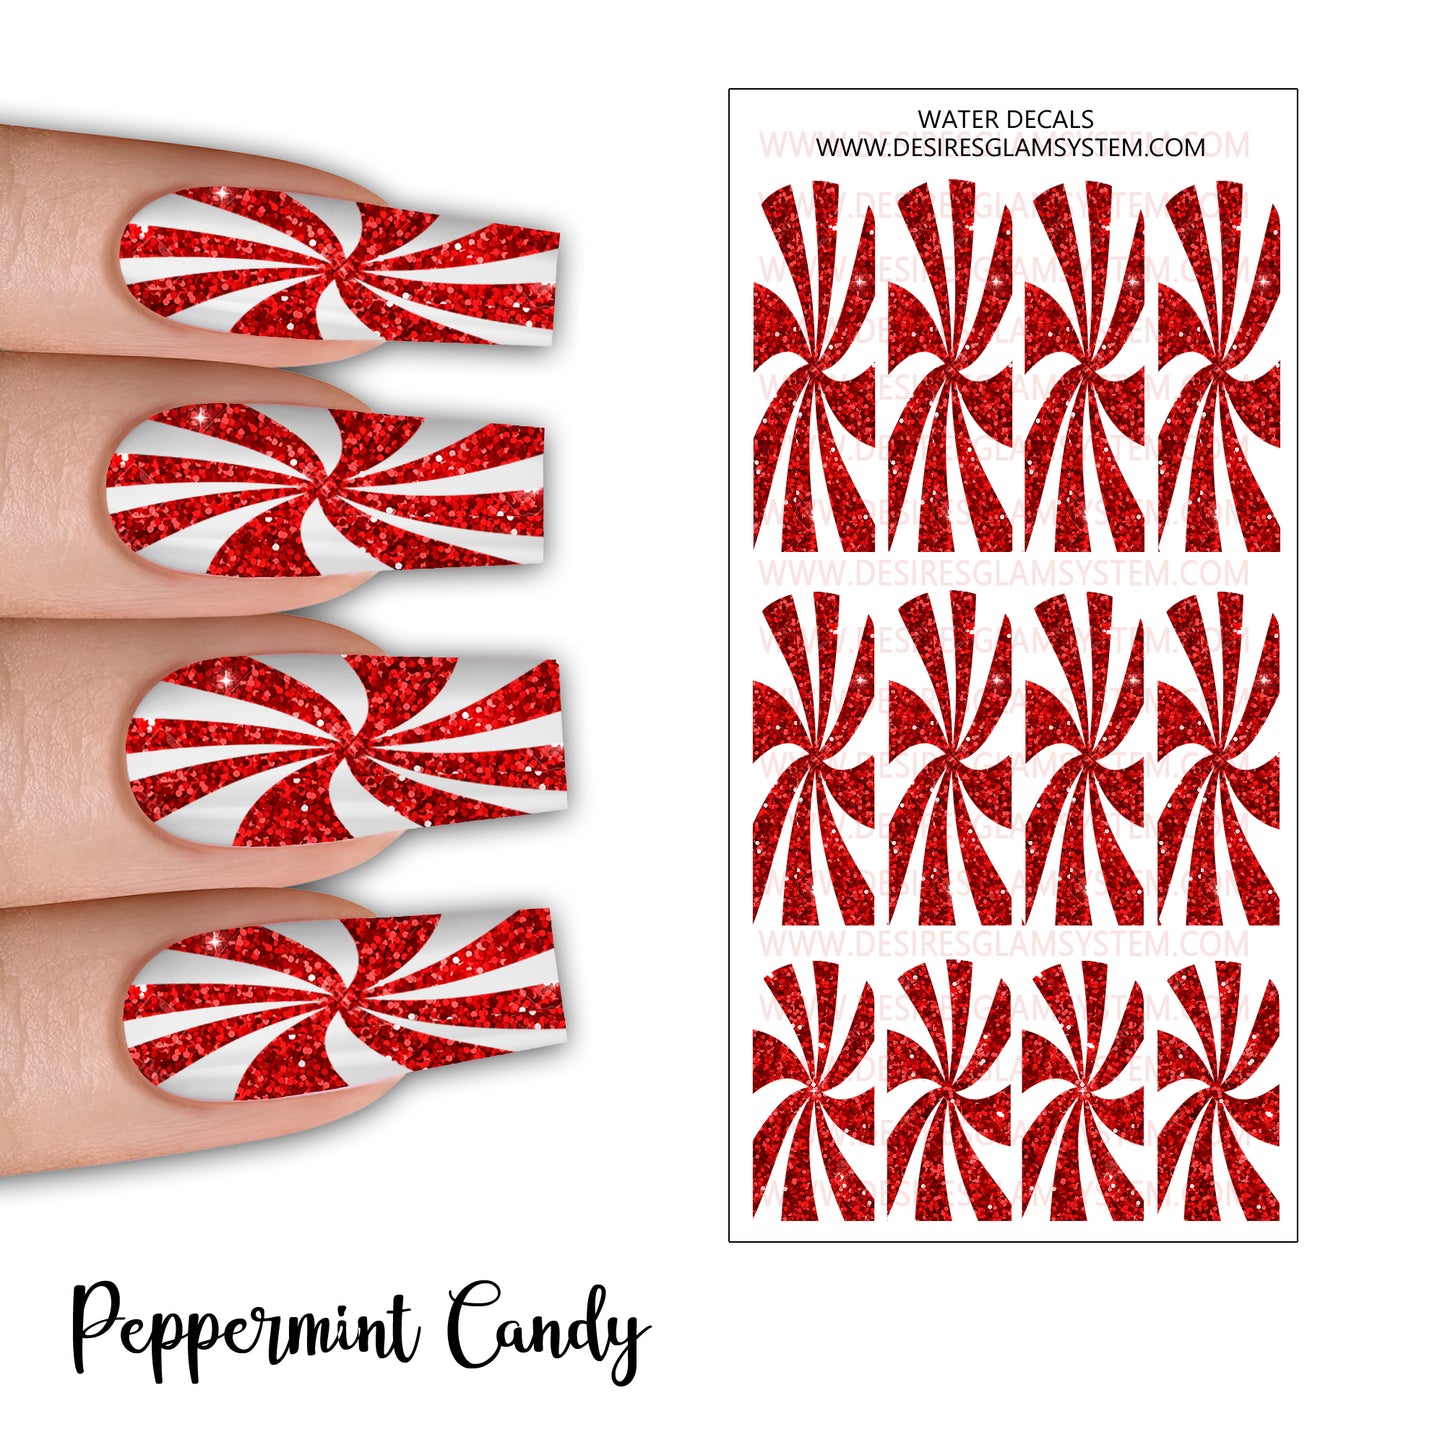 Peppermint Candy Water Decals